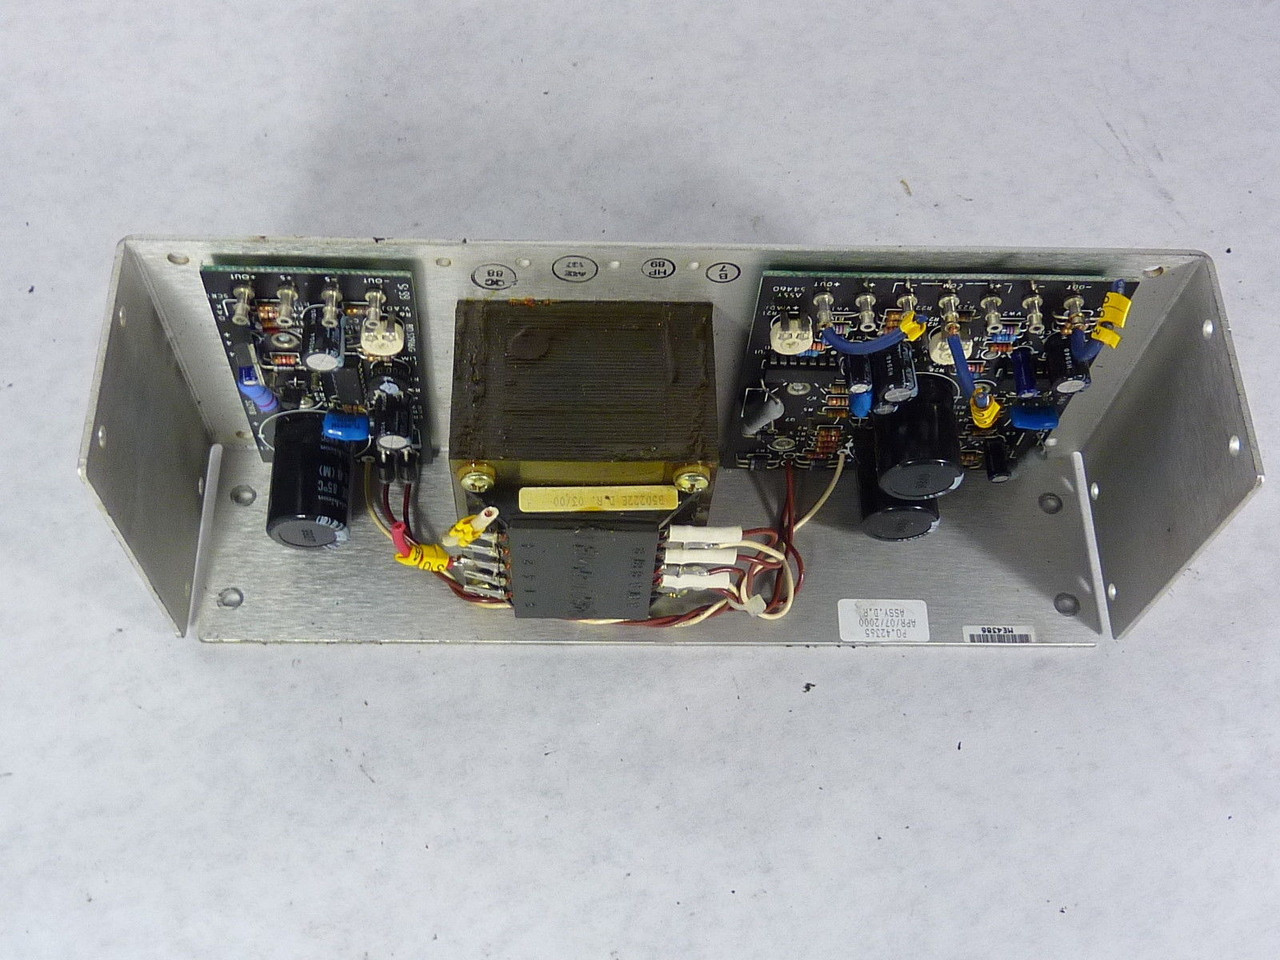 Power-One HBAA-40W-A Power Supply 5/15VDC Triple Output 0.8A USED